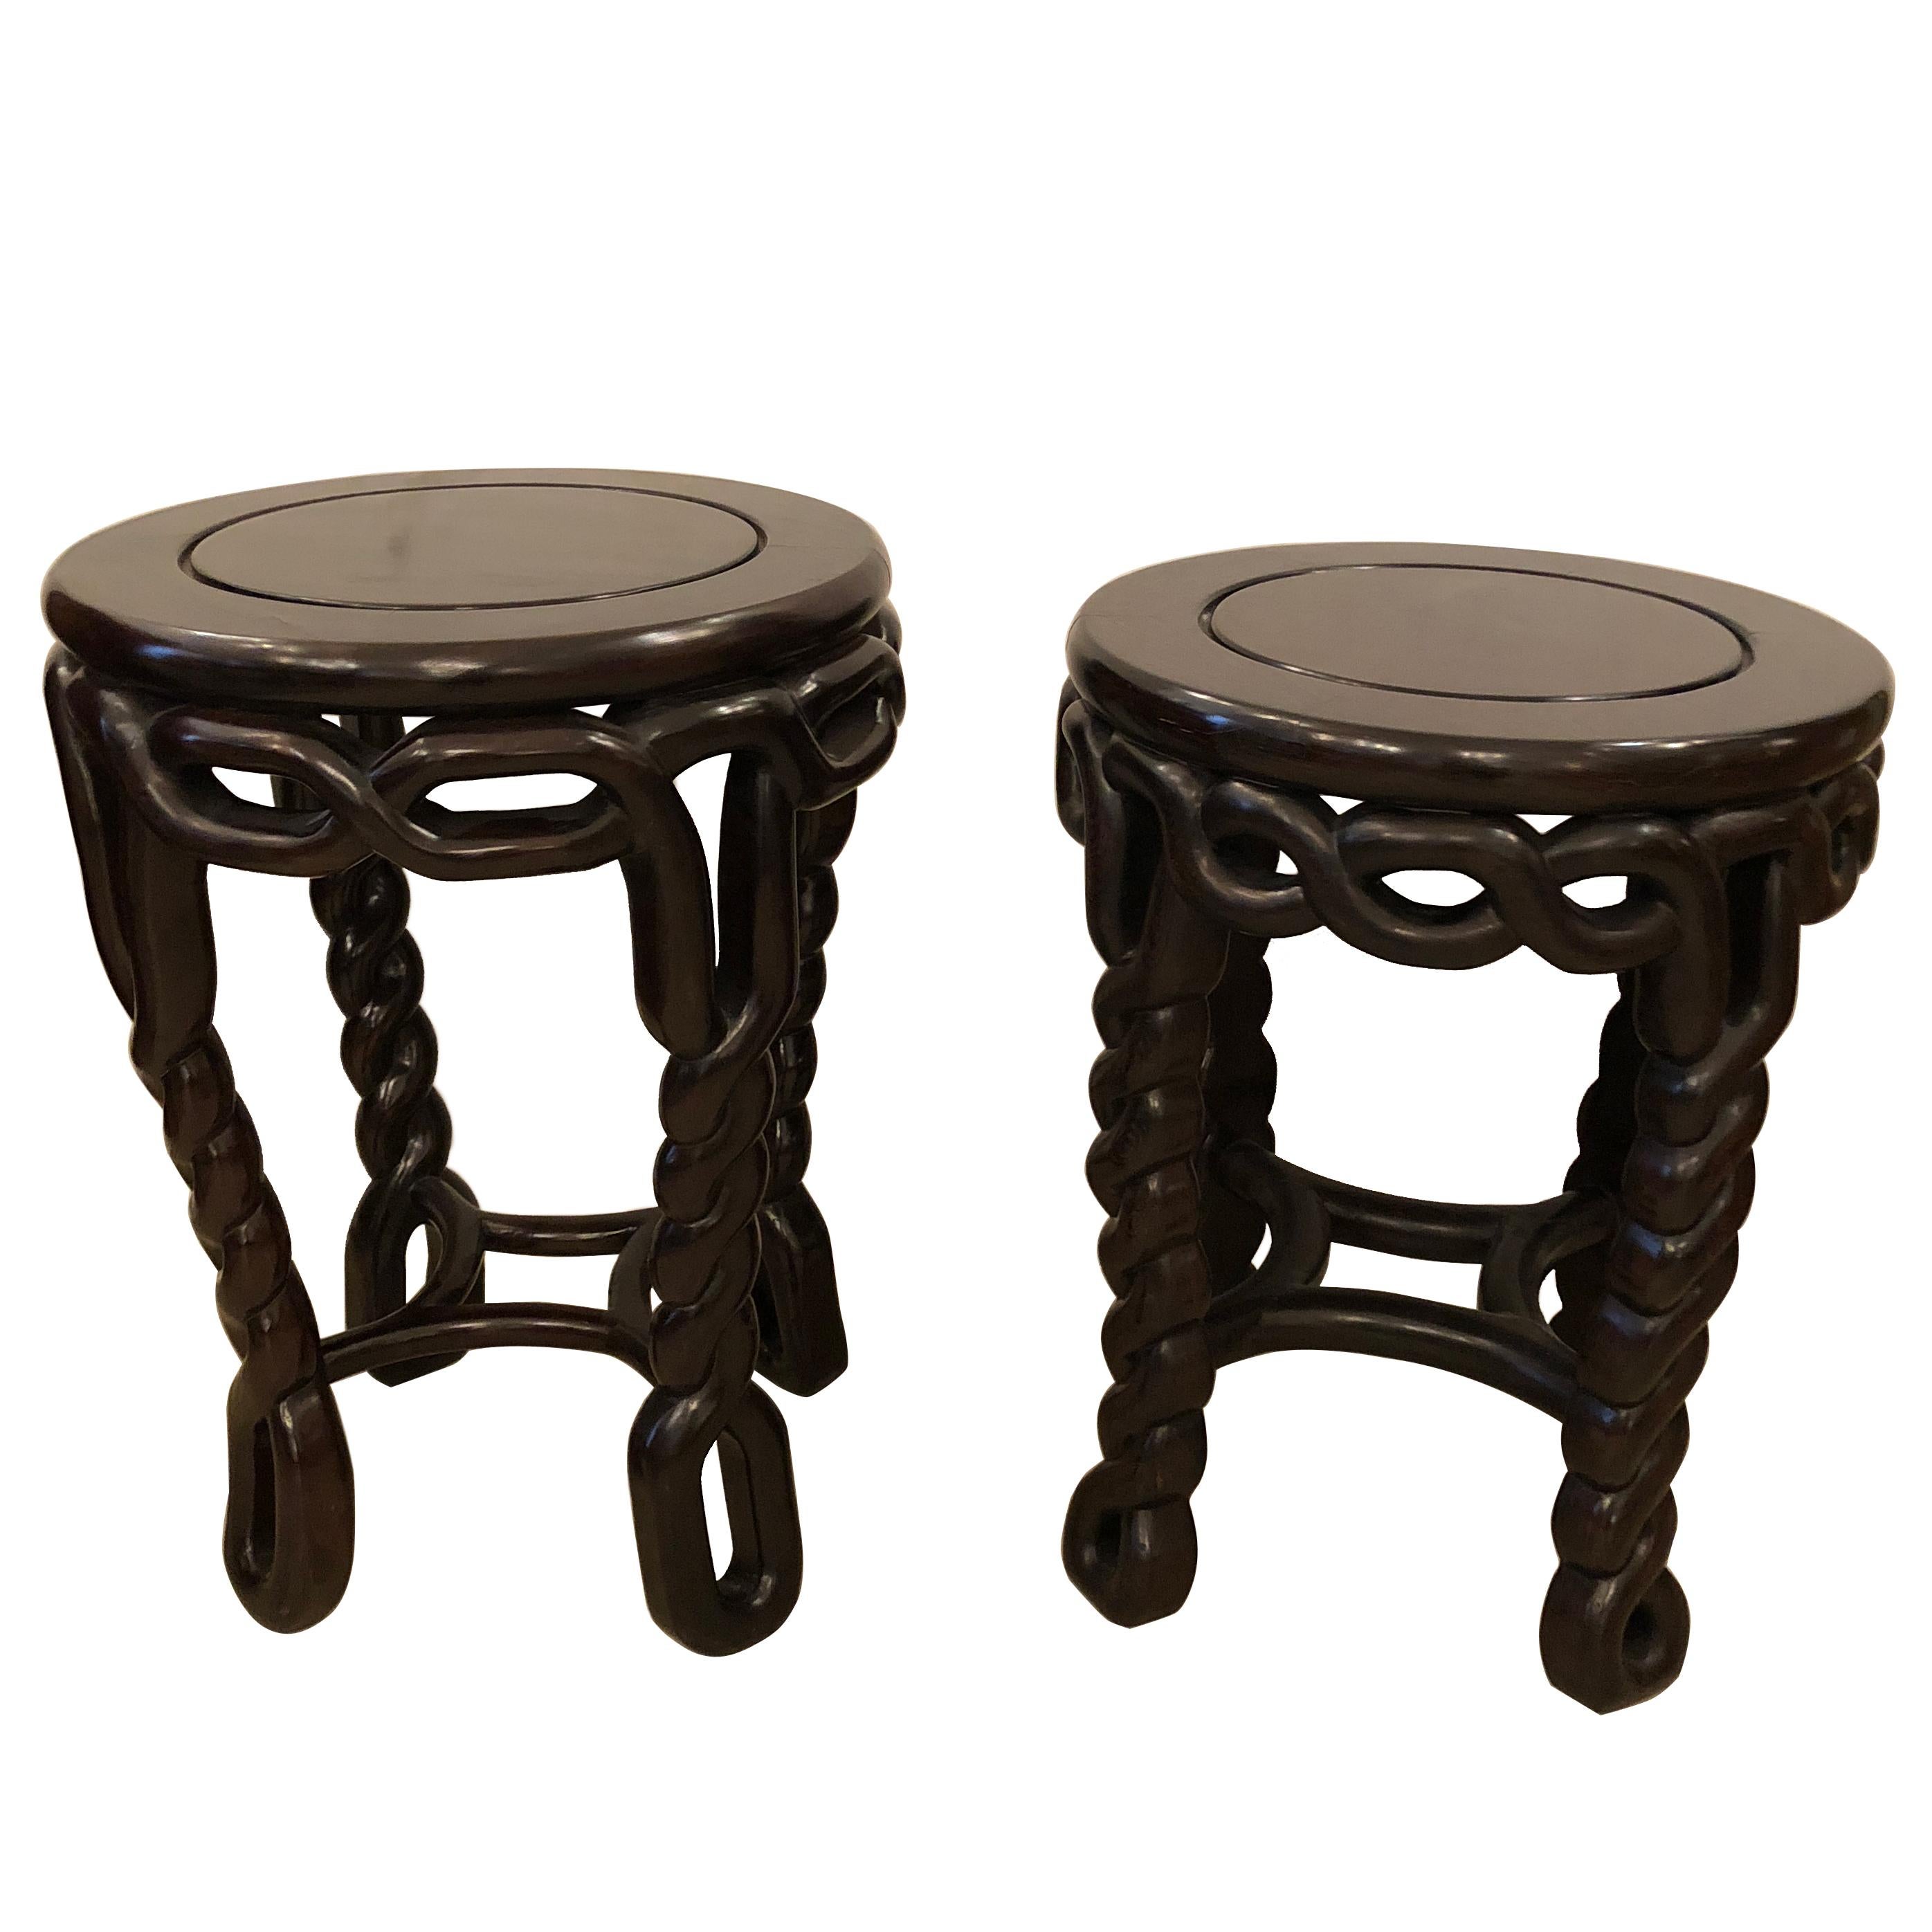 Pair of Handsome Exotic Wood End Tables or Side Accent Tables